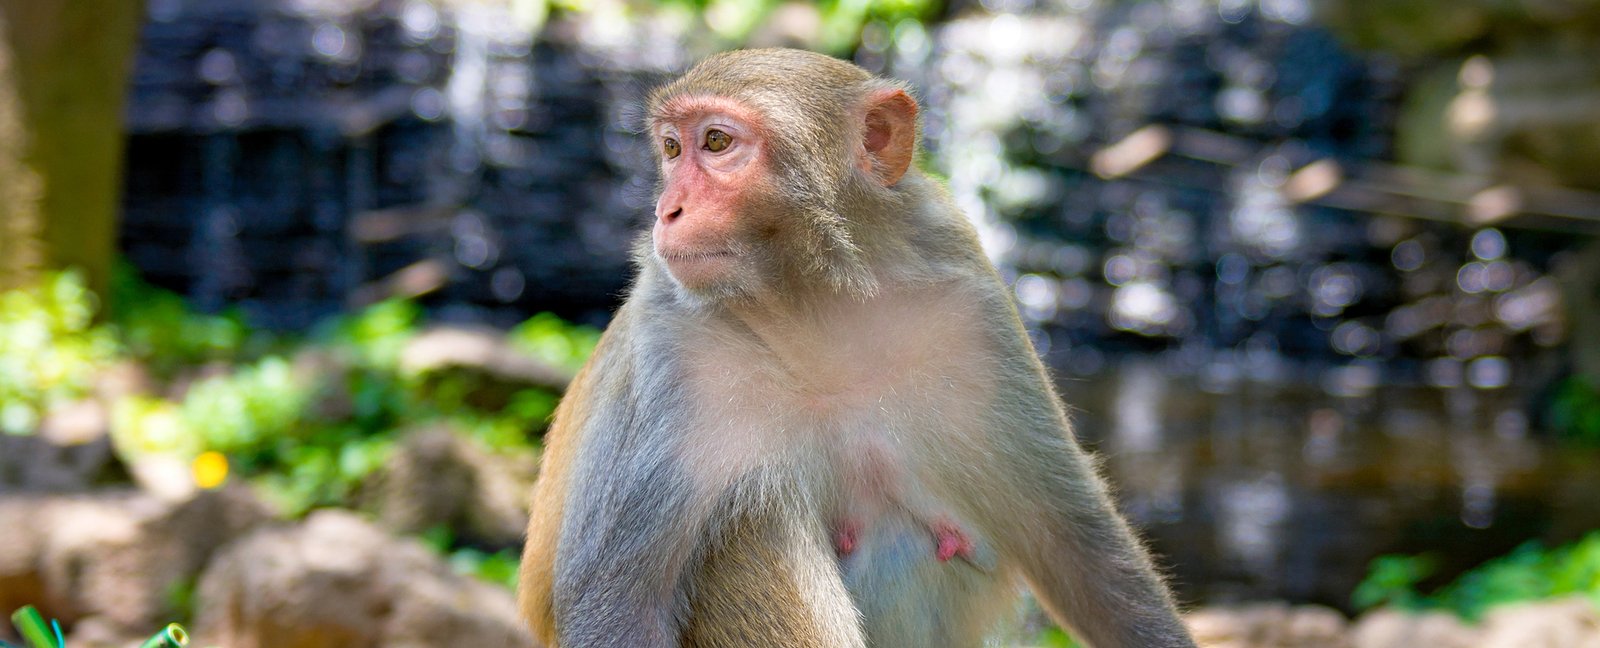 Monkey Study Reveals 91 Changes in Virtually Every Body Organ During Pregnancy ScienceAlert